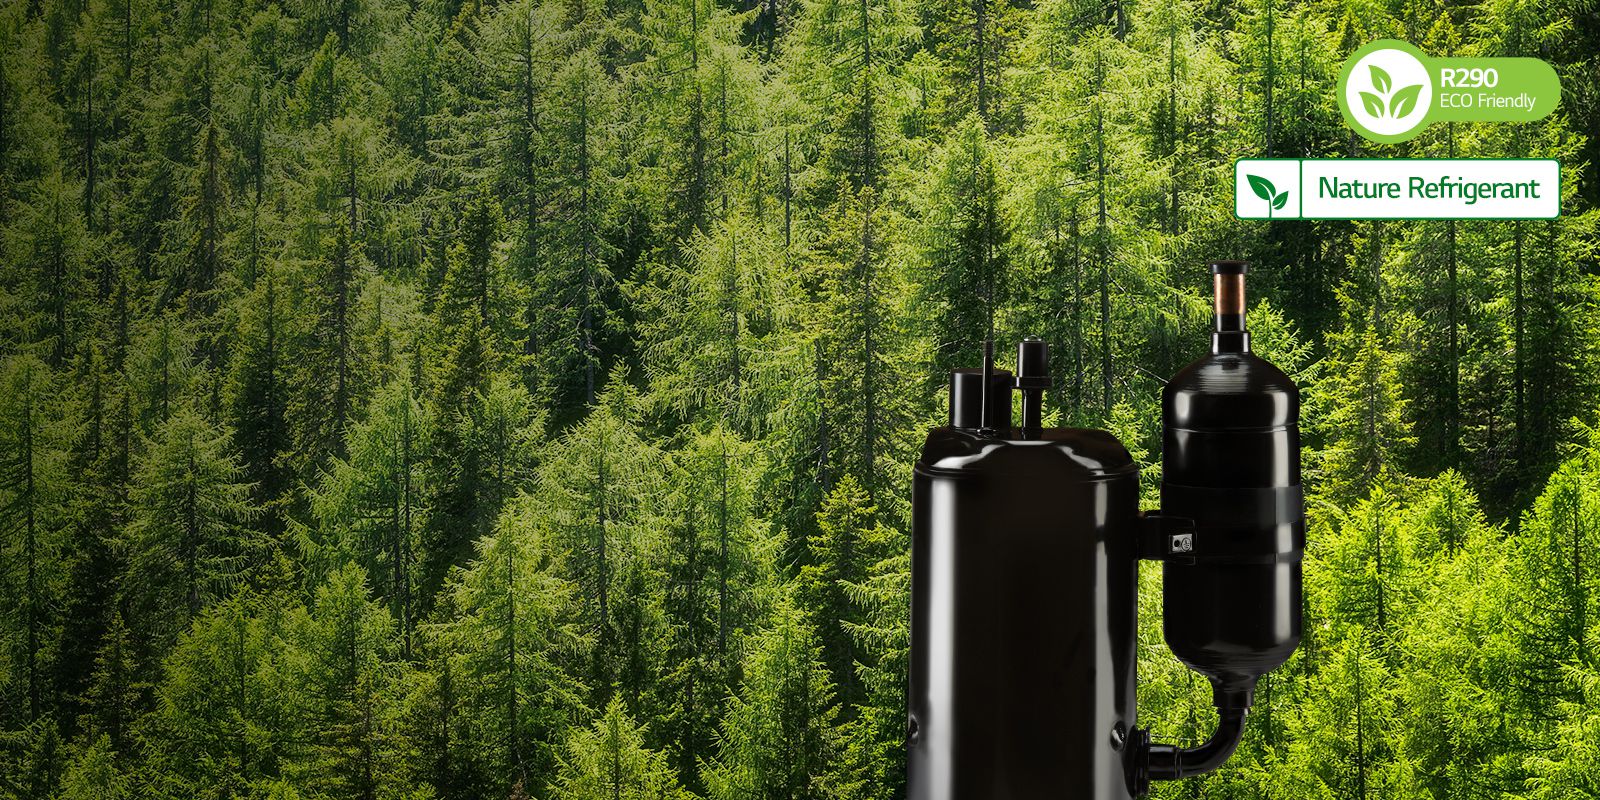 This is an image of a rotary product with a scenary of forest background.